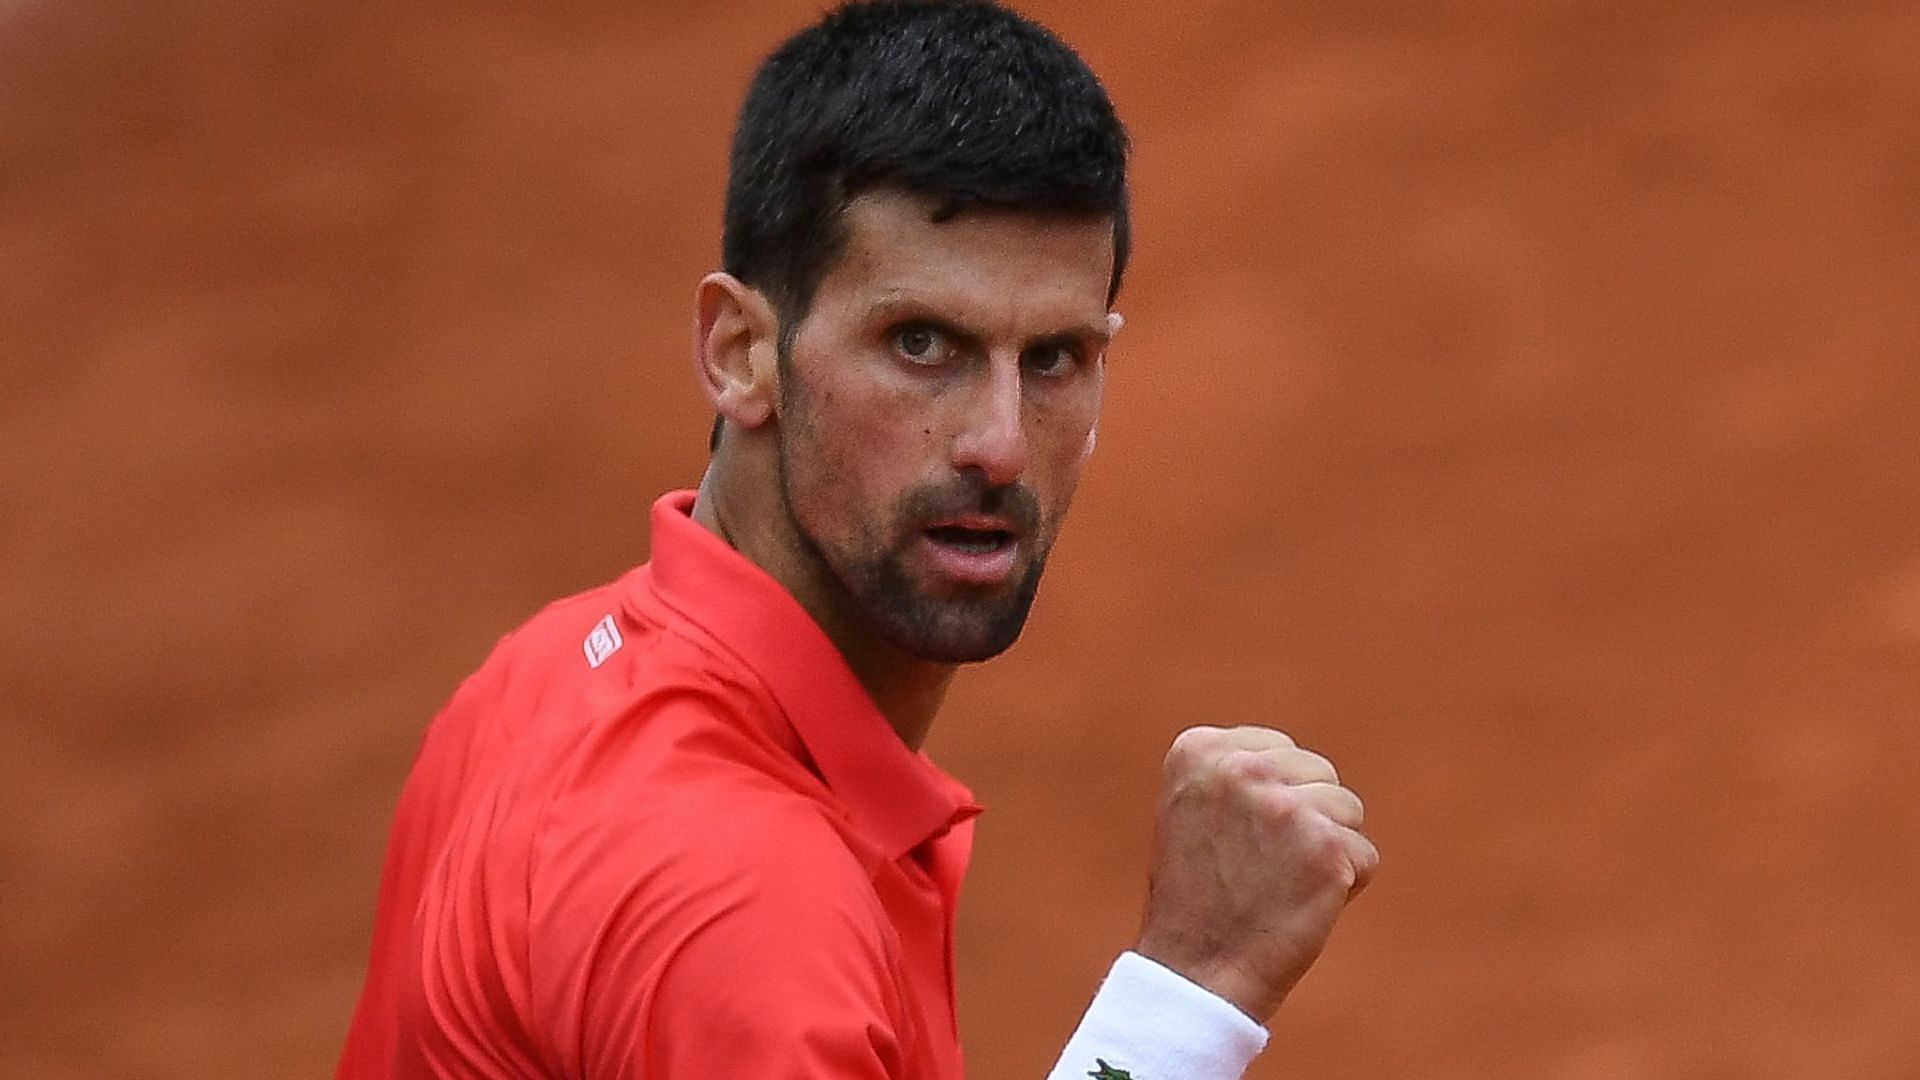 Novak Djokovic kept hitting his forehands aggrressively in the second set